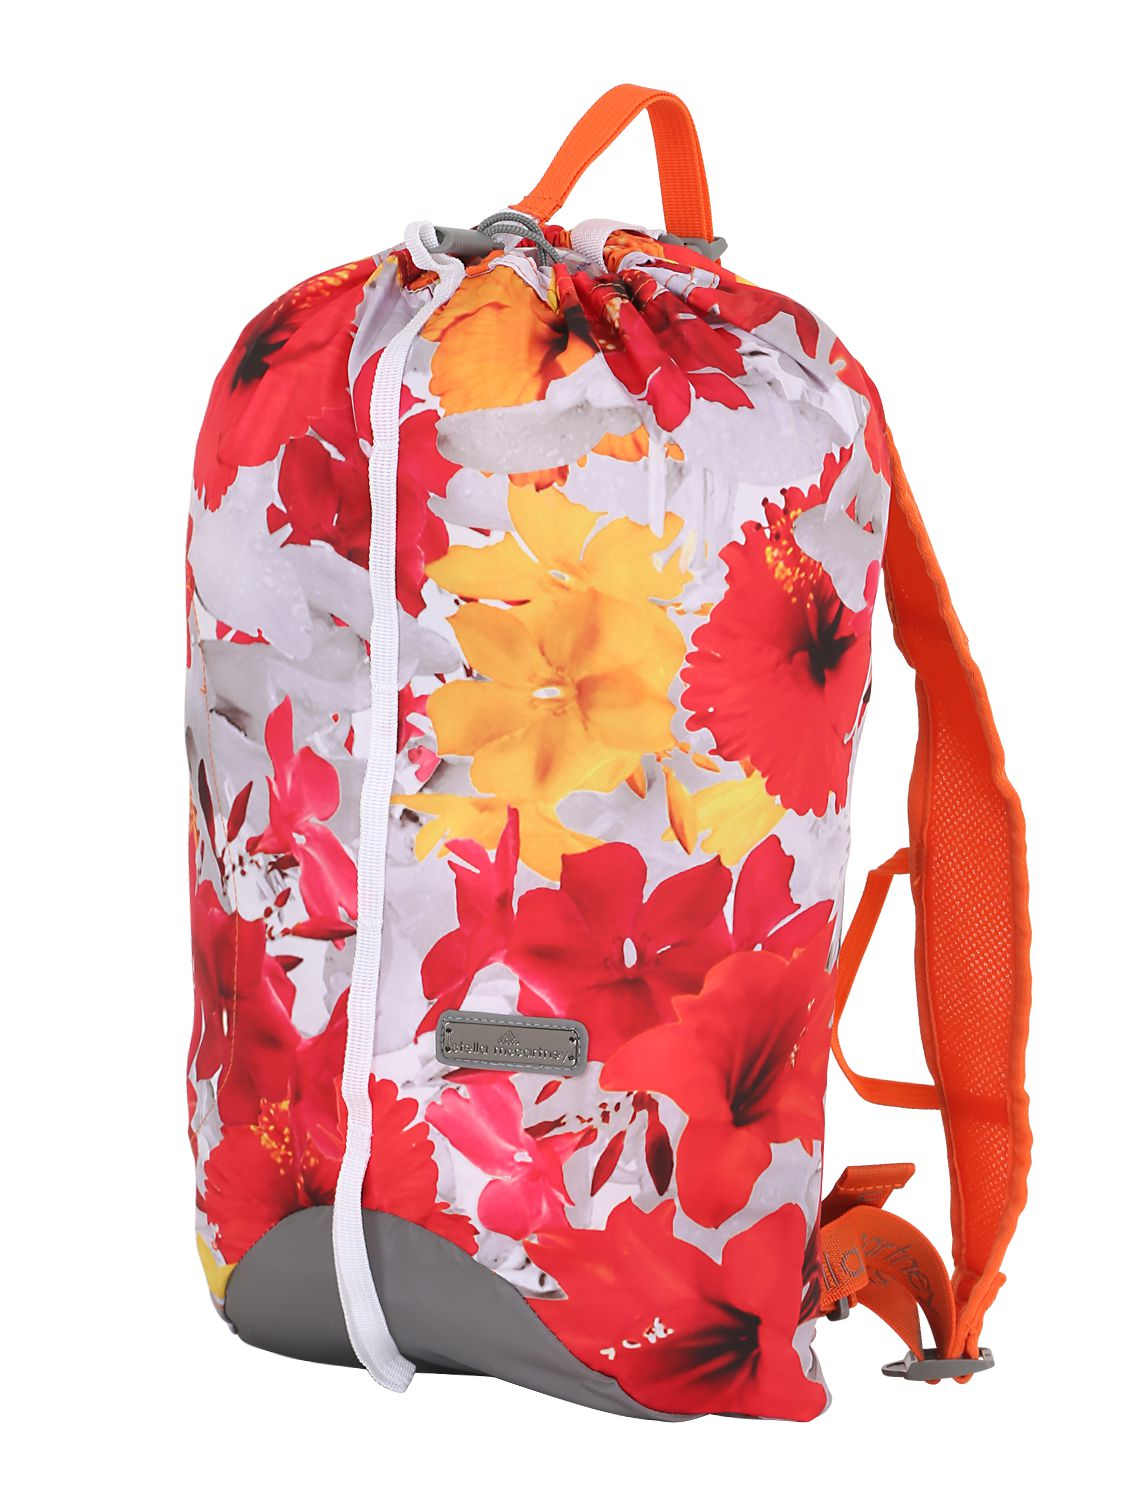 adidas By Stella McCartney Lace Floral Printed Running Backpack in Orange/Red (Orange) - Lyst